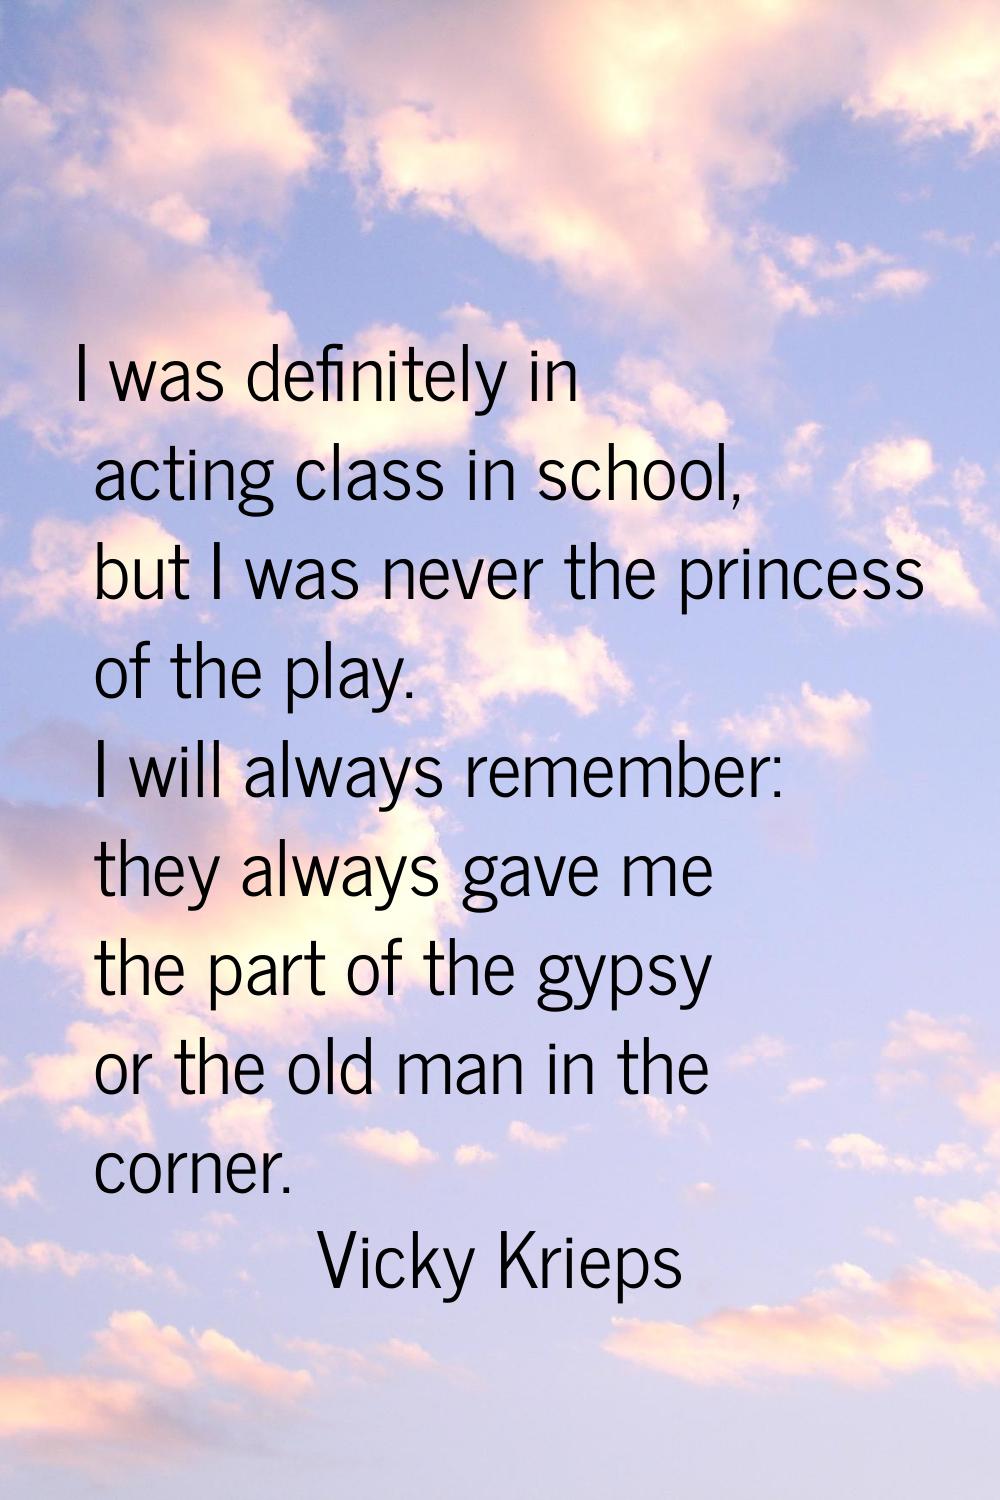 I was definitely in acting class in school, but I was never the princess of the play. I will always